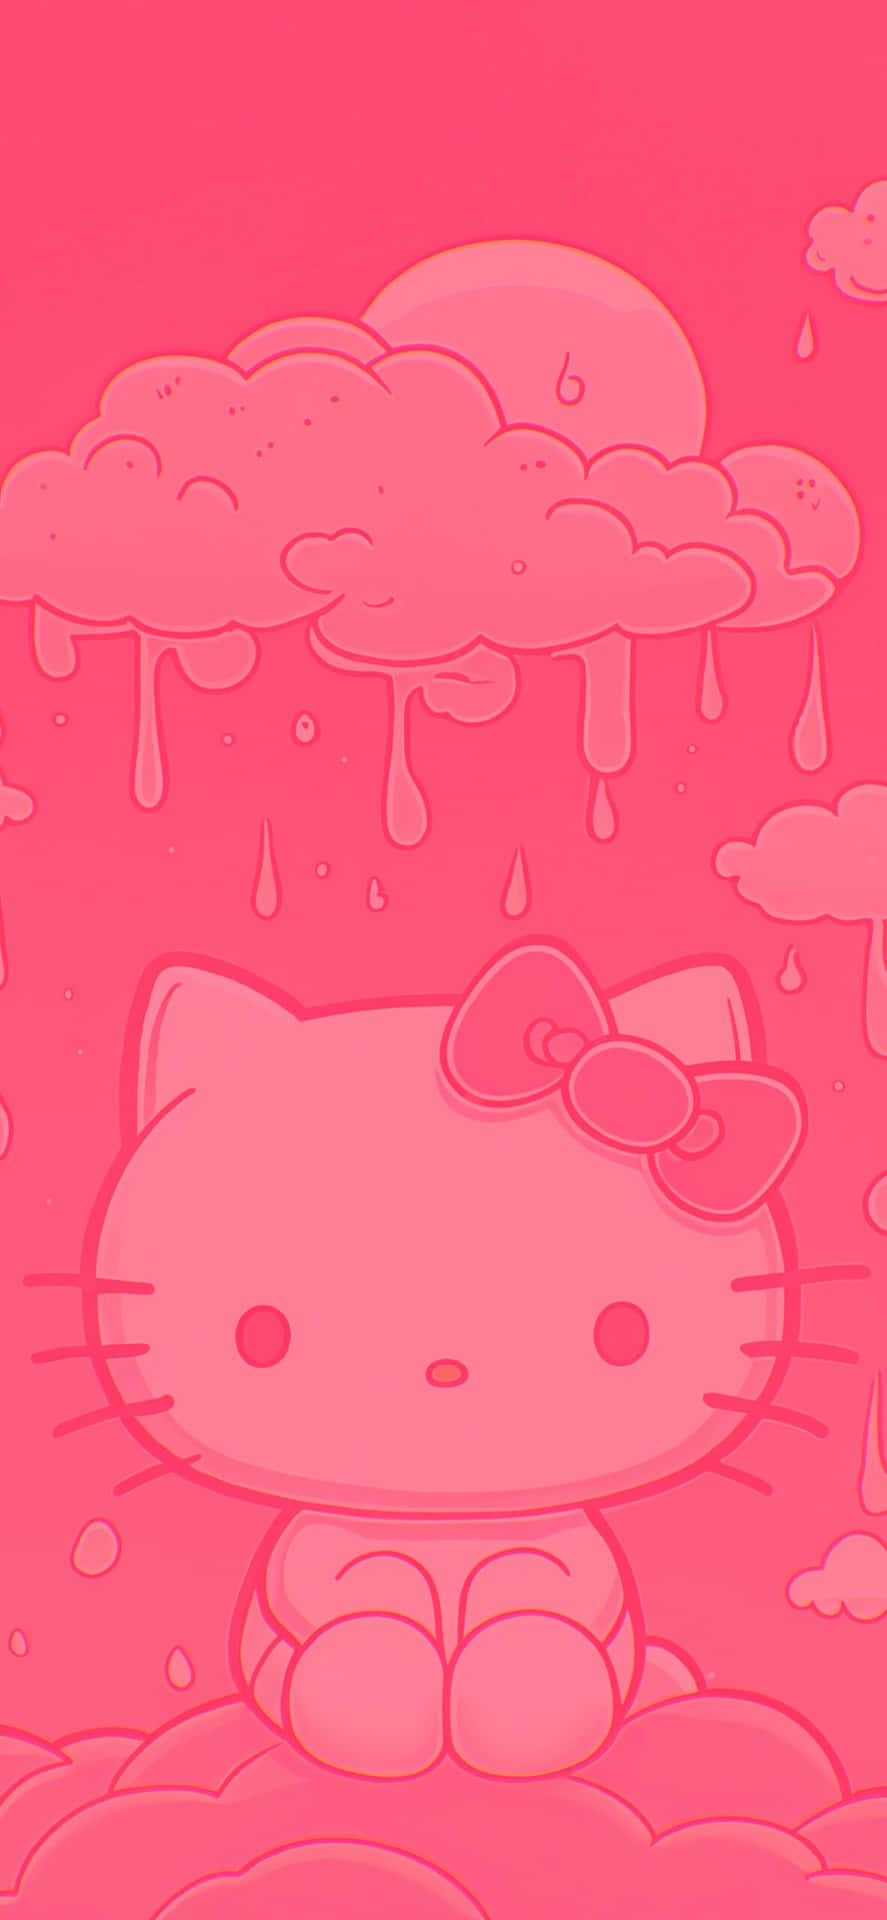 Pink Hello Kitty Rainy Clouds Wallpaper